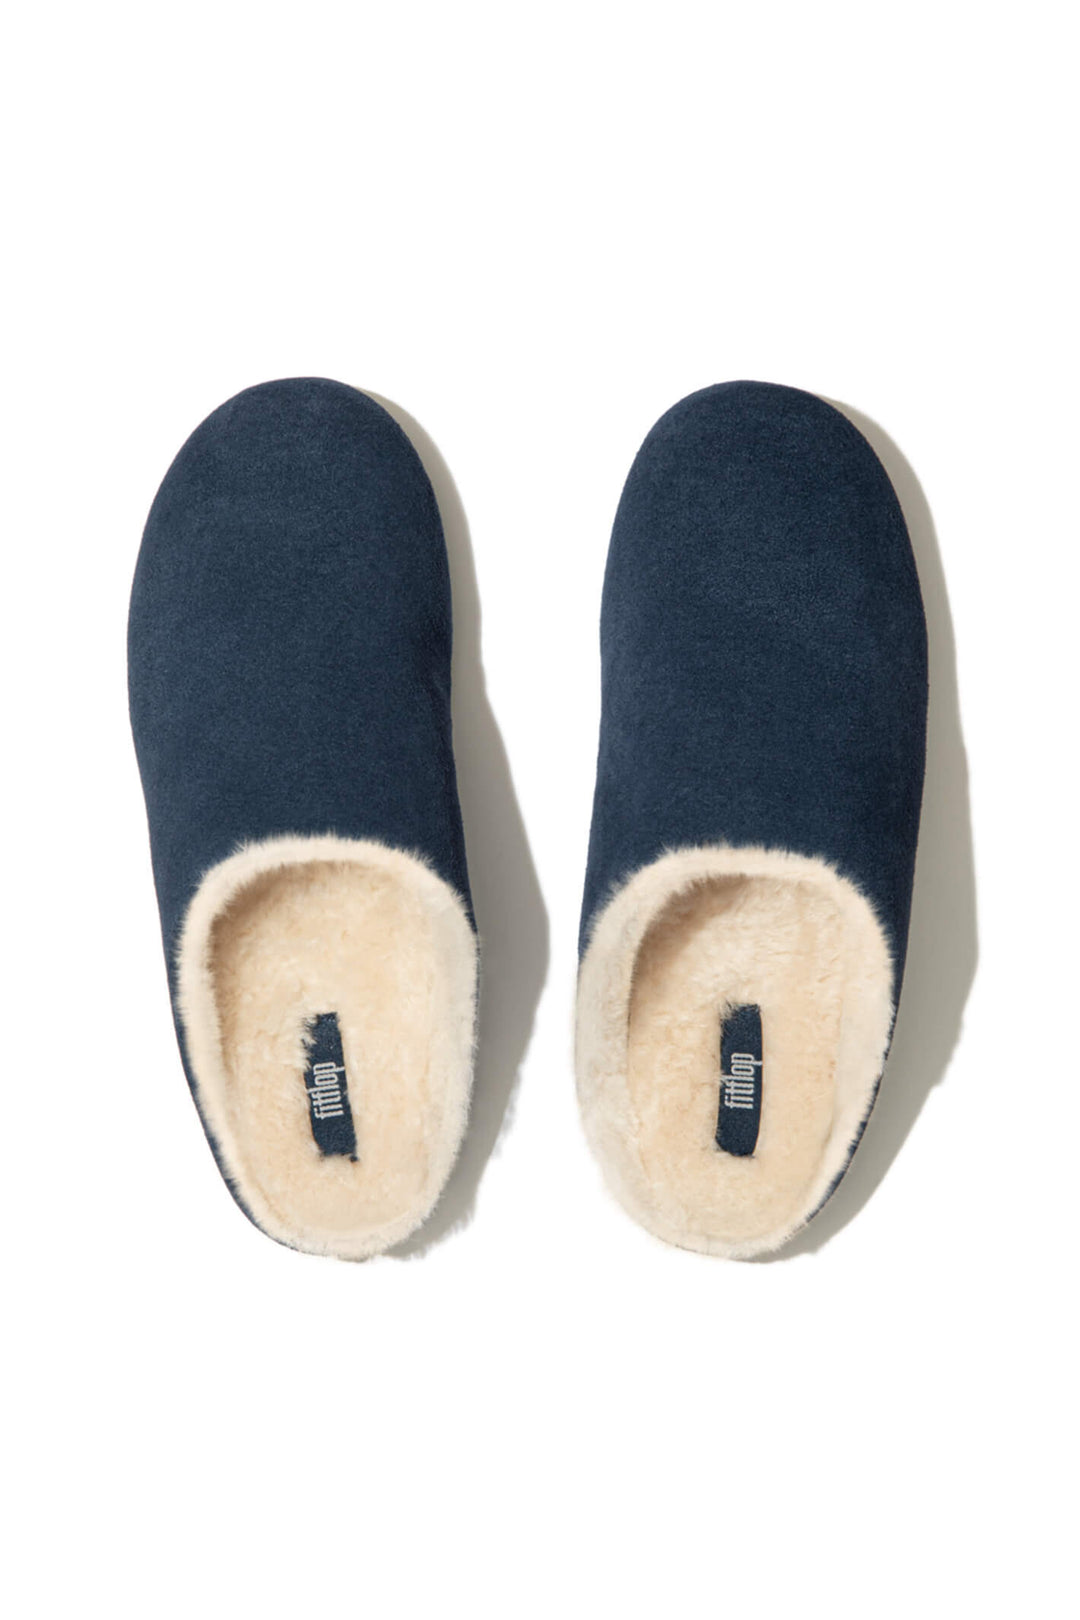 Fitflop N28-399 Chrissie Shearling Midnight Navy Slipper - Shirley Allum Boutique